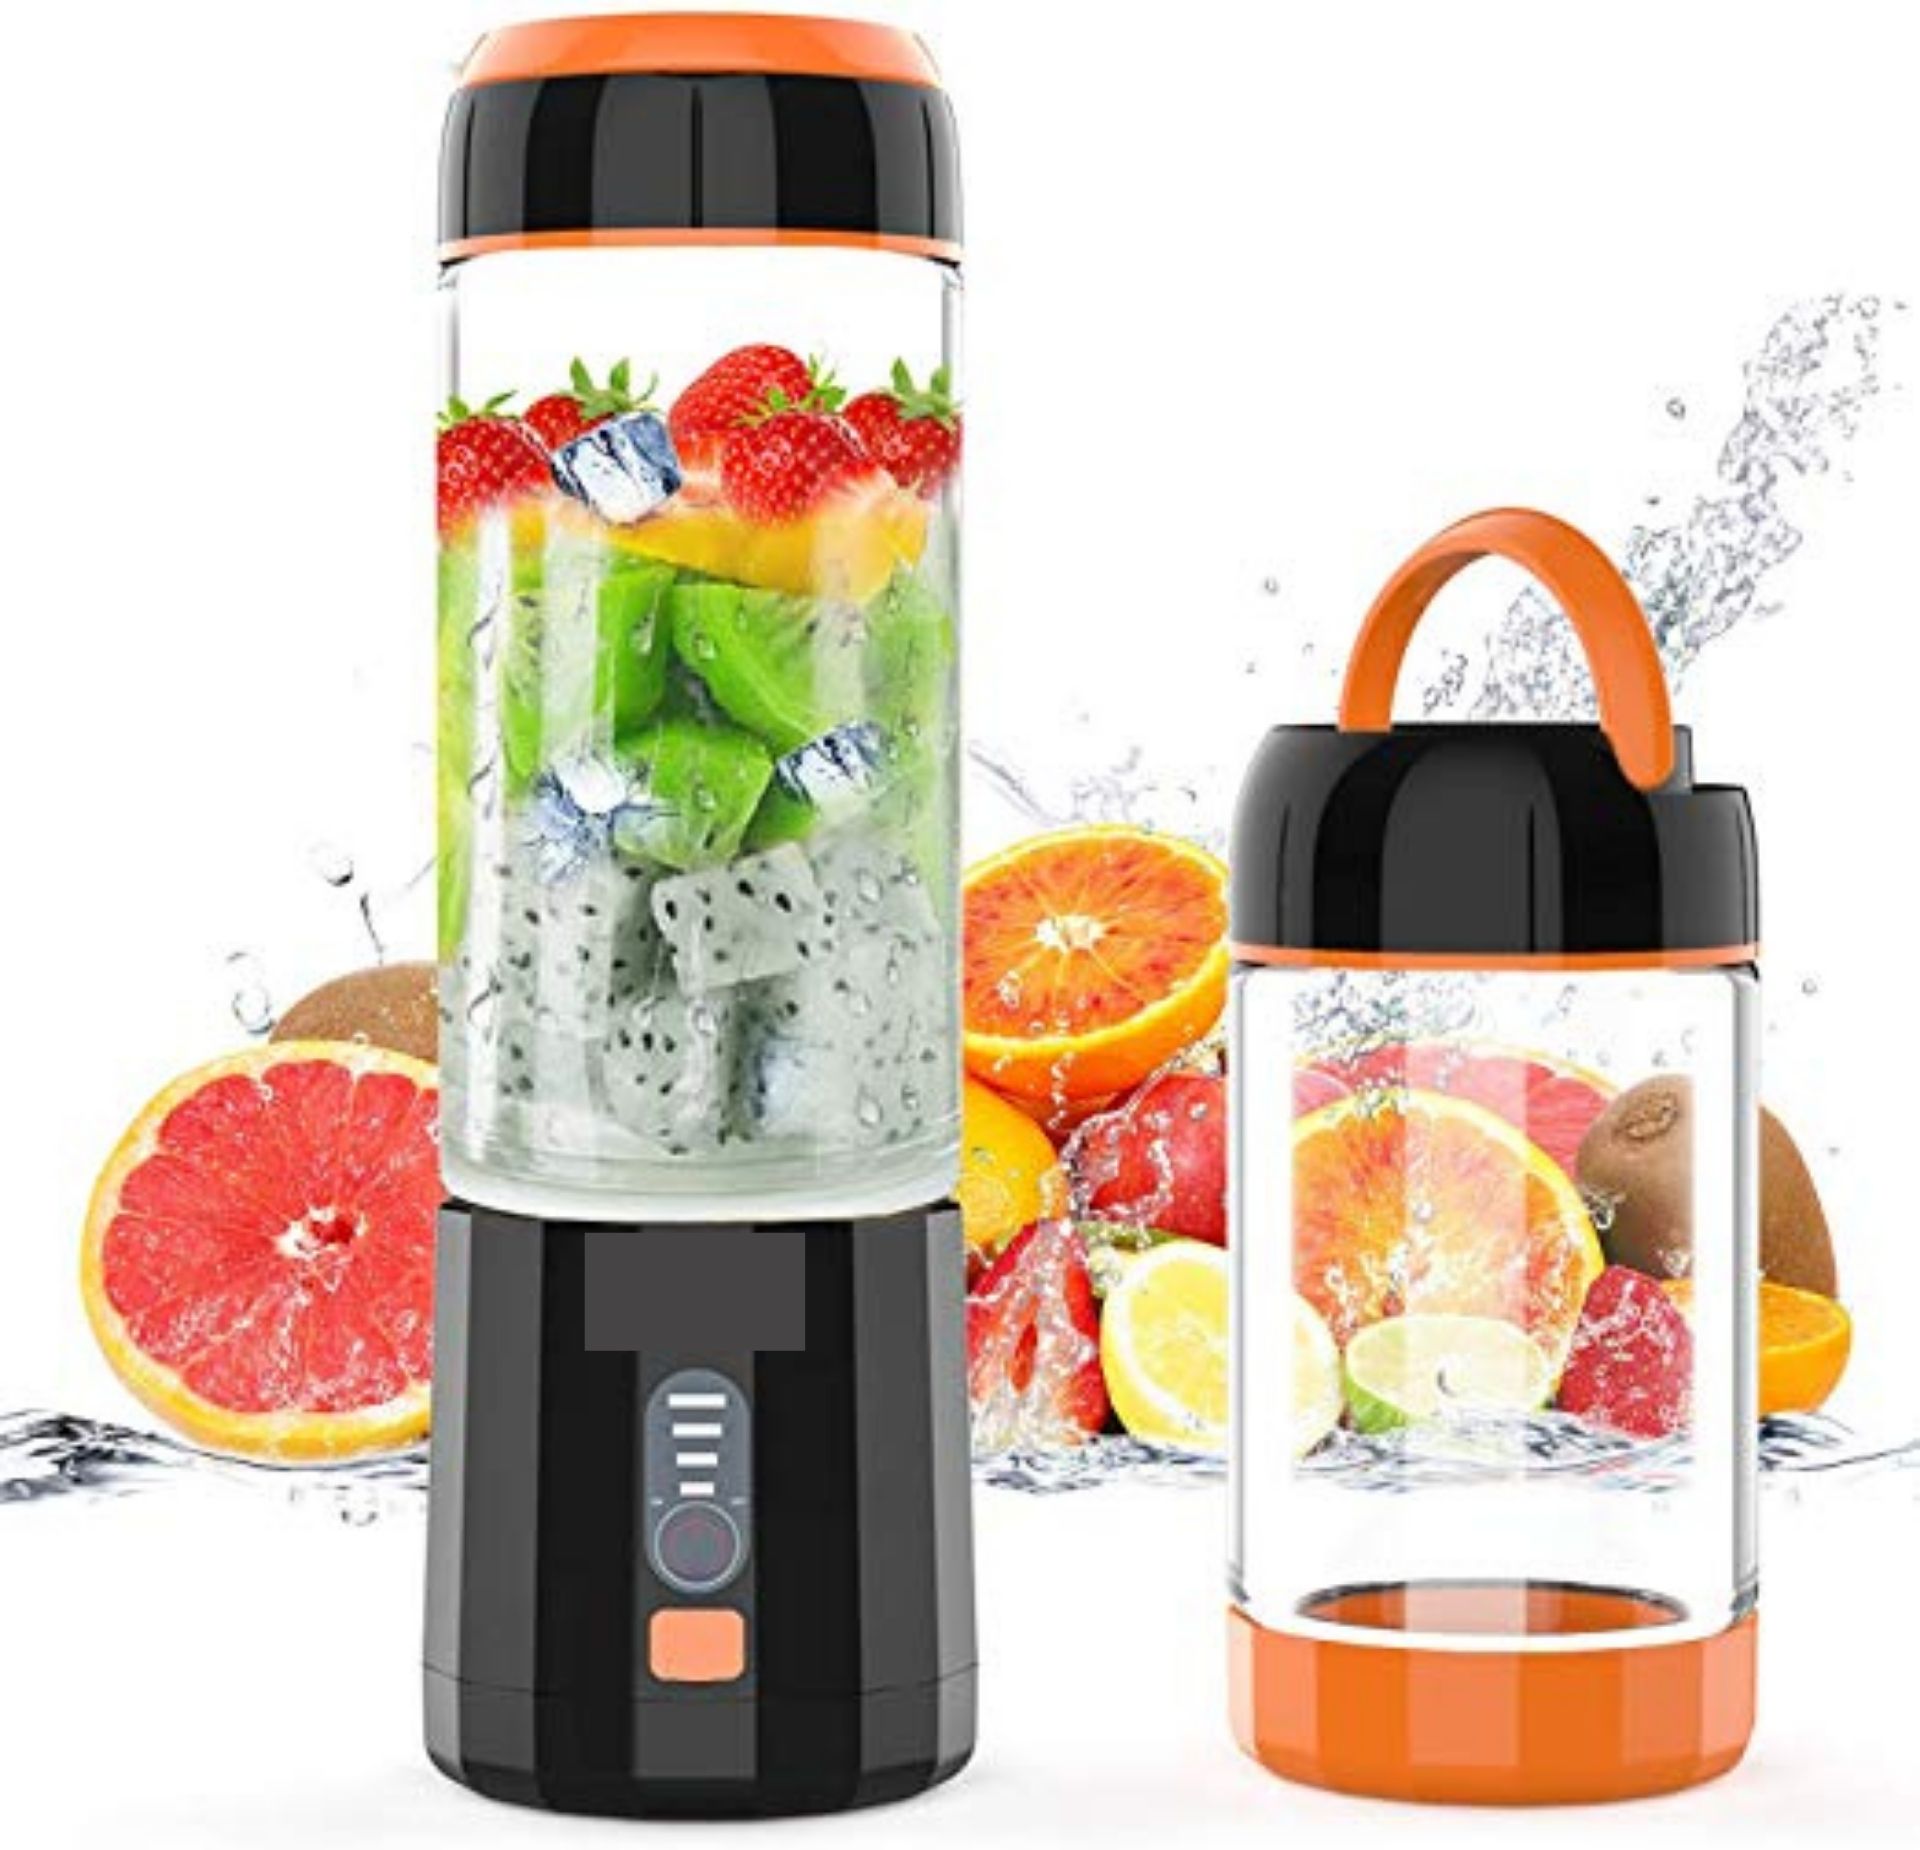 Lozayi Portable Blender Review (2022): Features + Pros/Cons